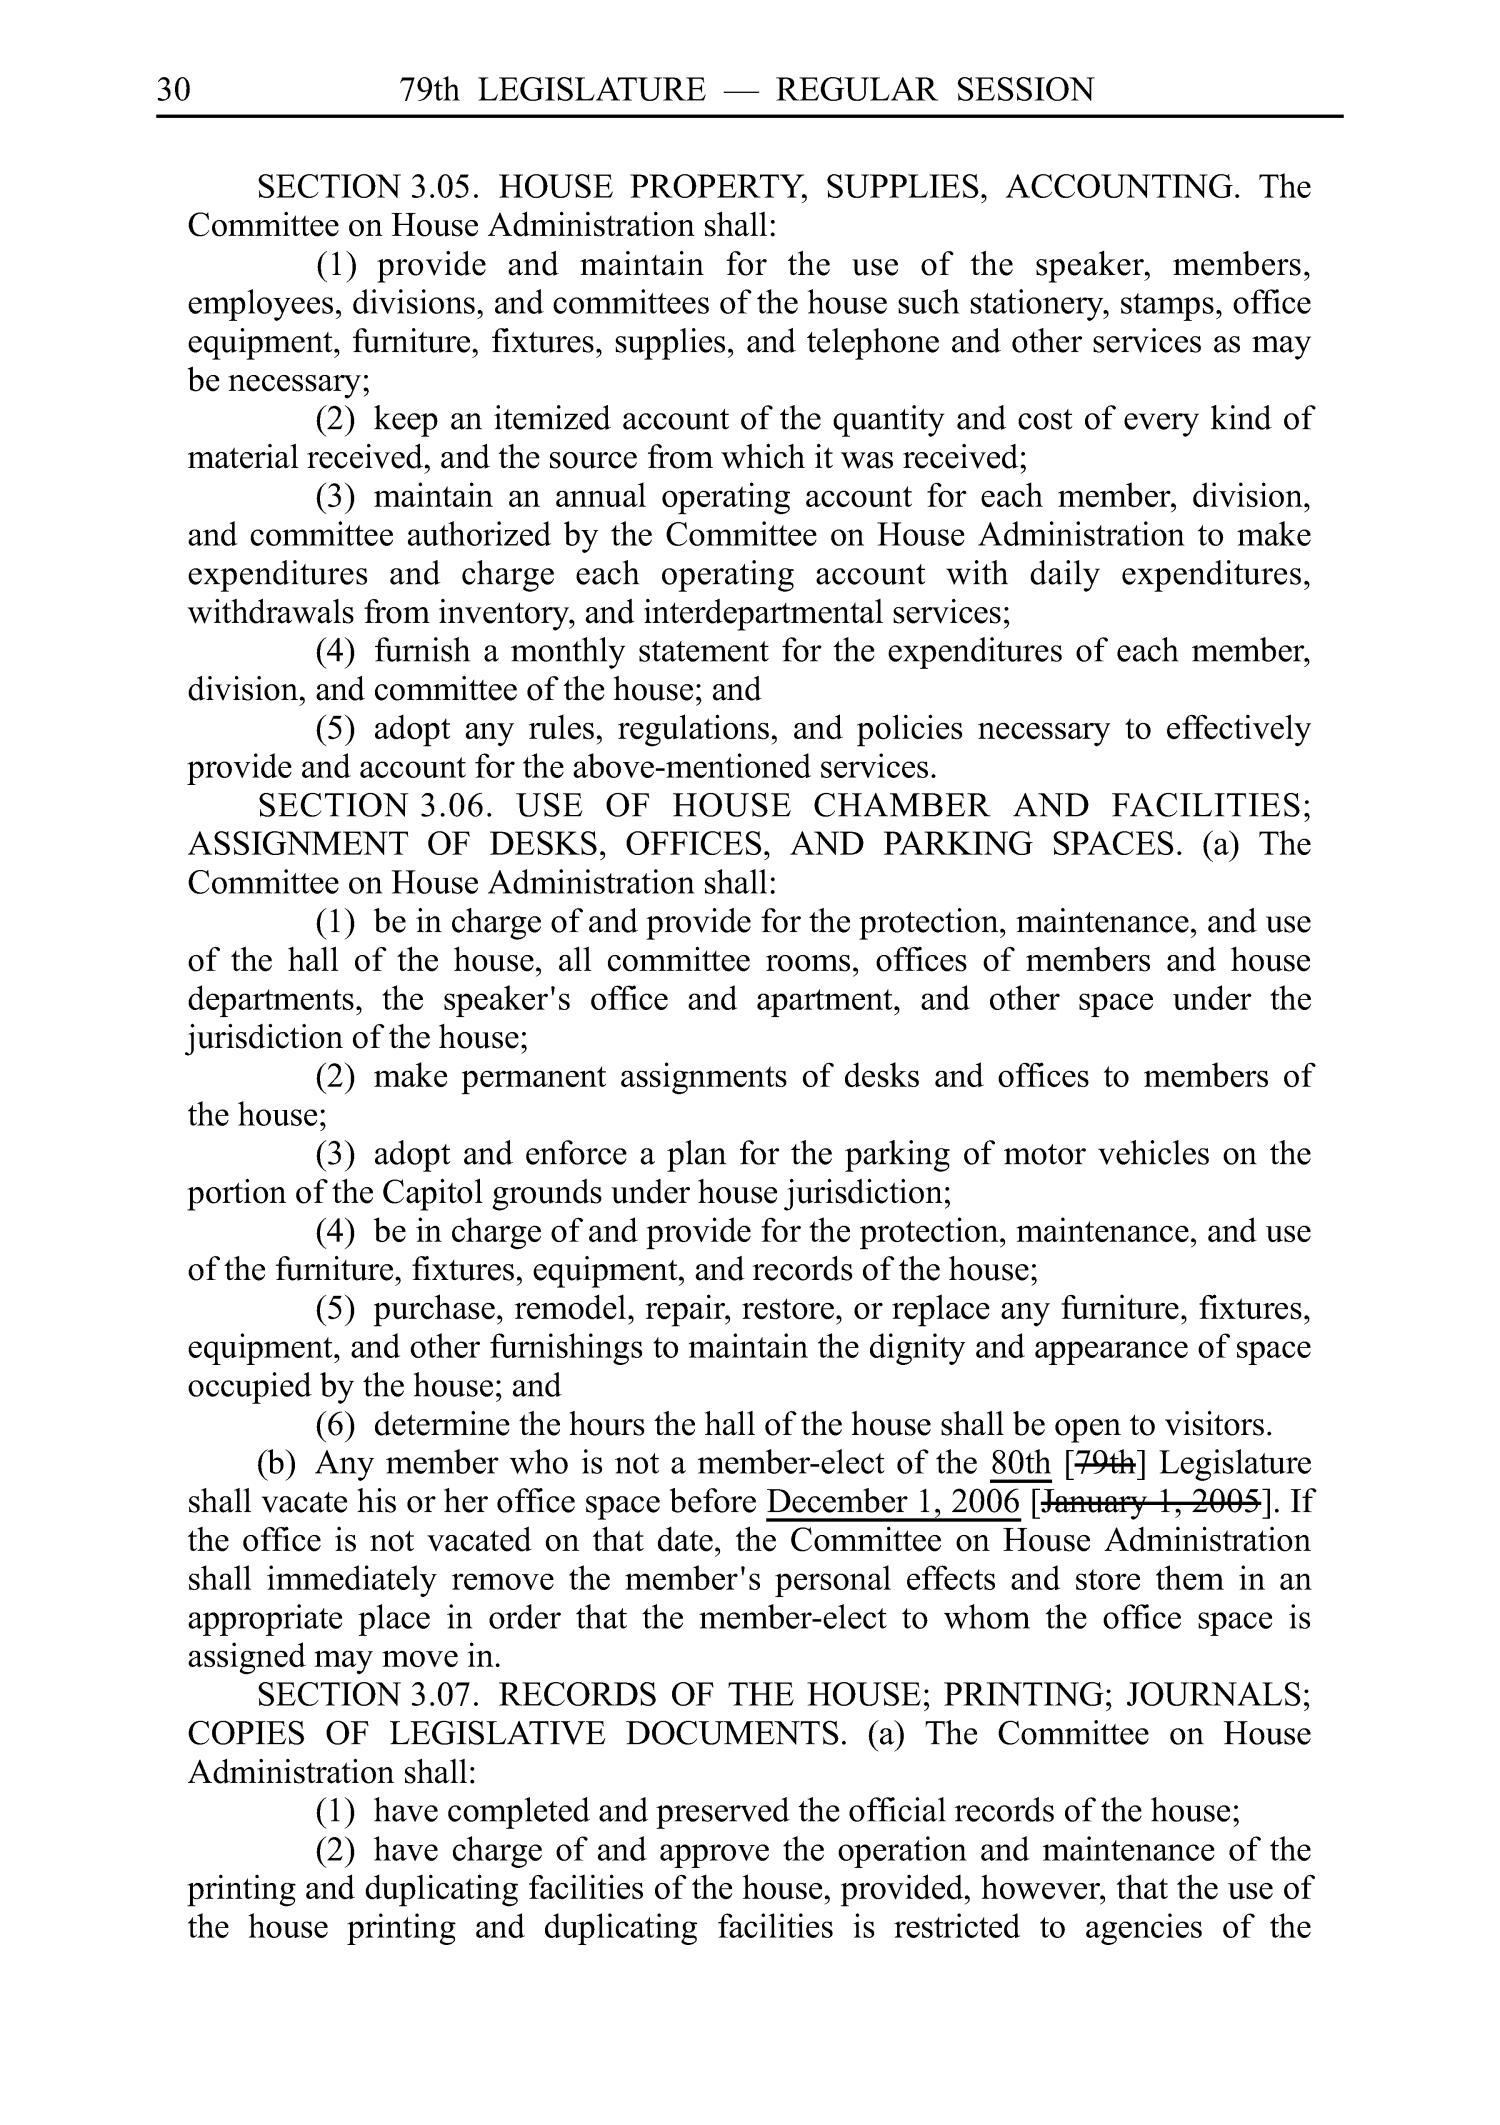 Journal of the House of Representatives of the Regular Session of the Seventy-Ninth Legislature of the State of Texas, Volume 1
                                                
                                                    30
                                                